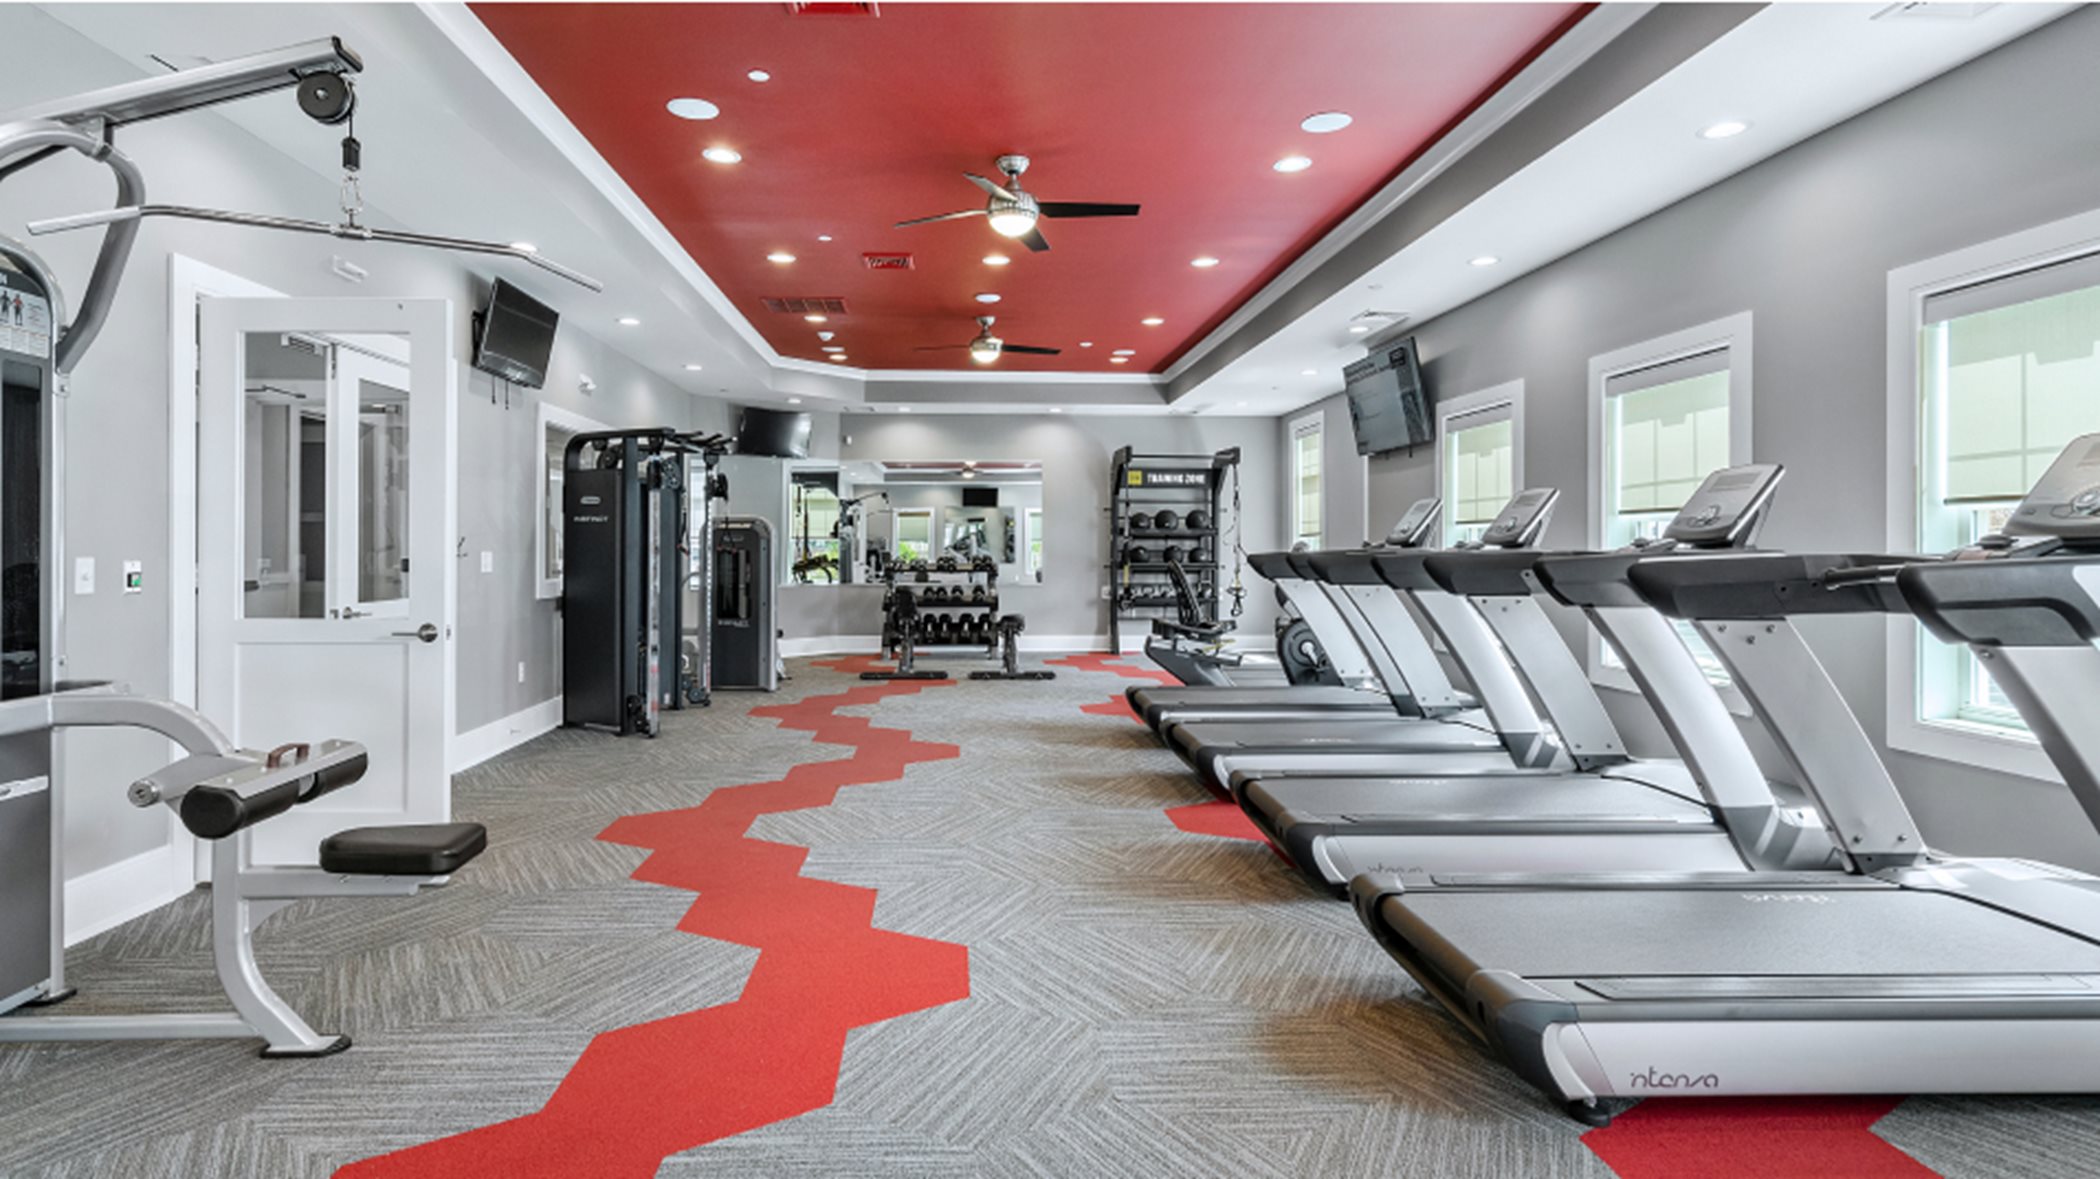 Fitness center with treadmills and weight lifting equipment